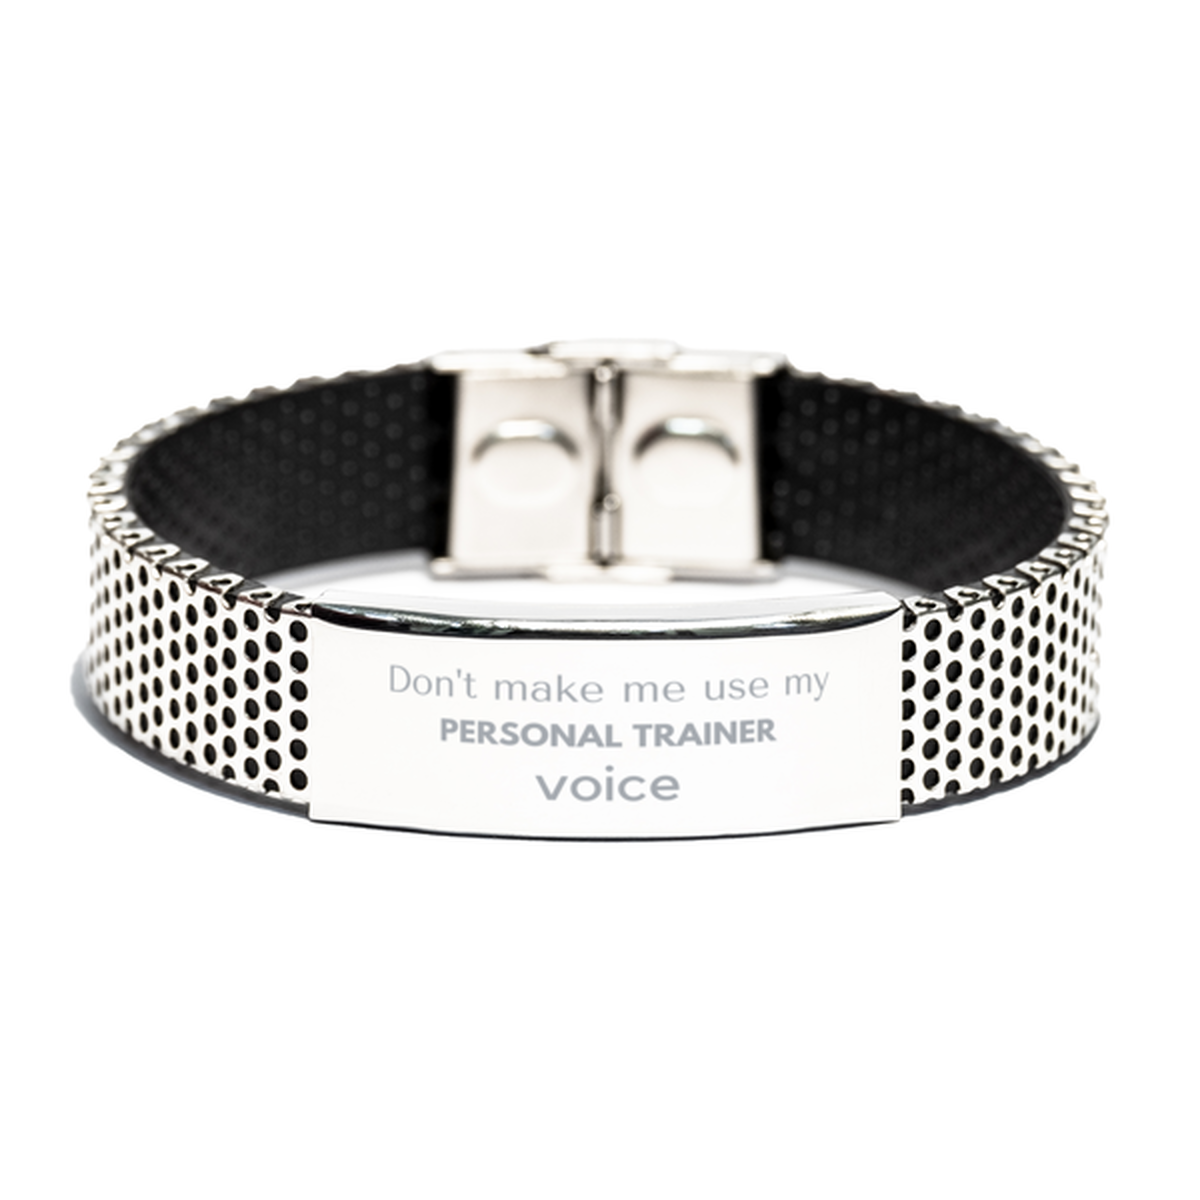 Don't make me use my Personal Trainer voice, Sarcasm Personal Trainer Gifts, Christmas Personal Trainer Stainless Steel Bracelet Birthday Unique Gifts For Personal Trainer Coworkers, Men, Women, Colleague, Friends